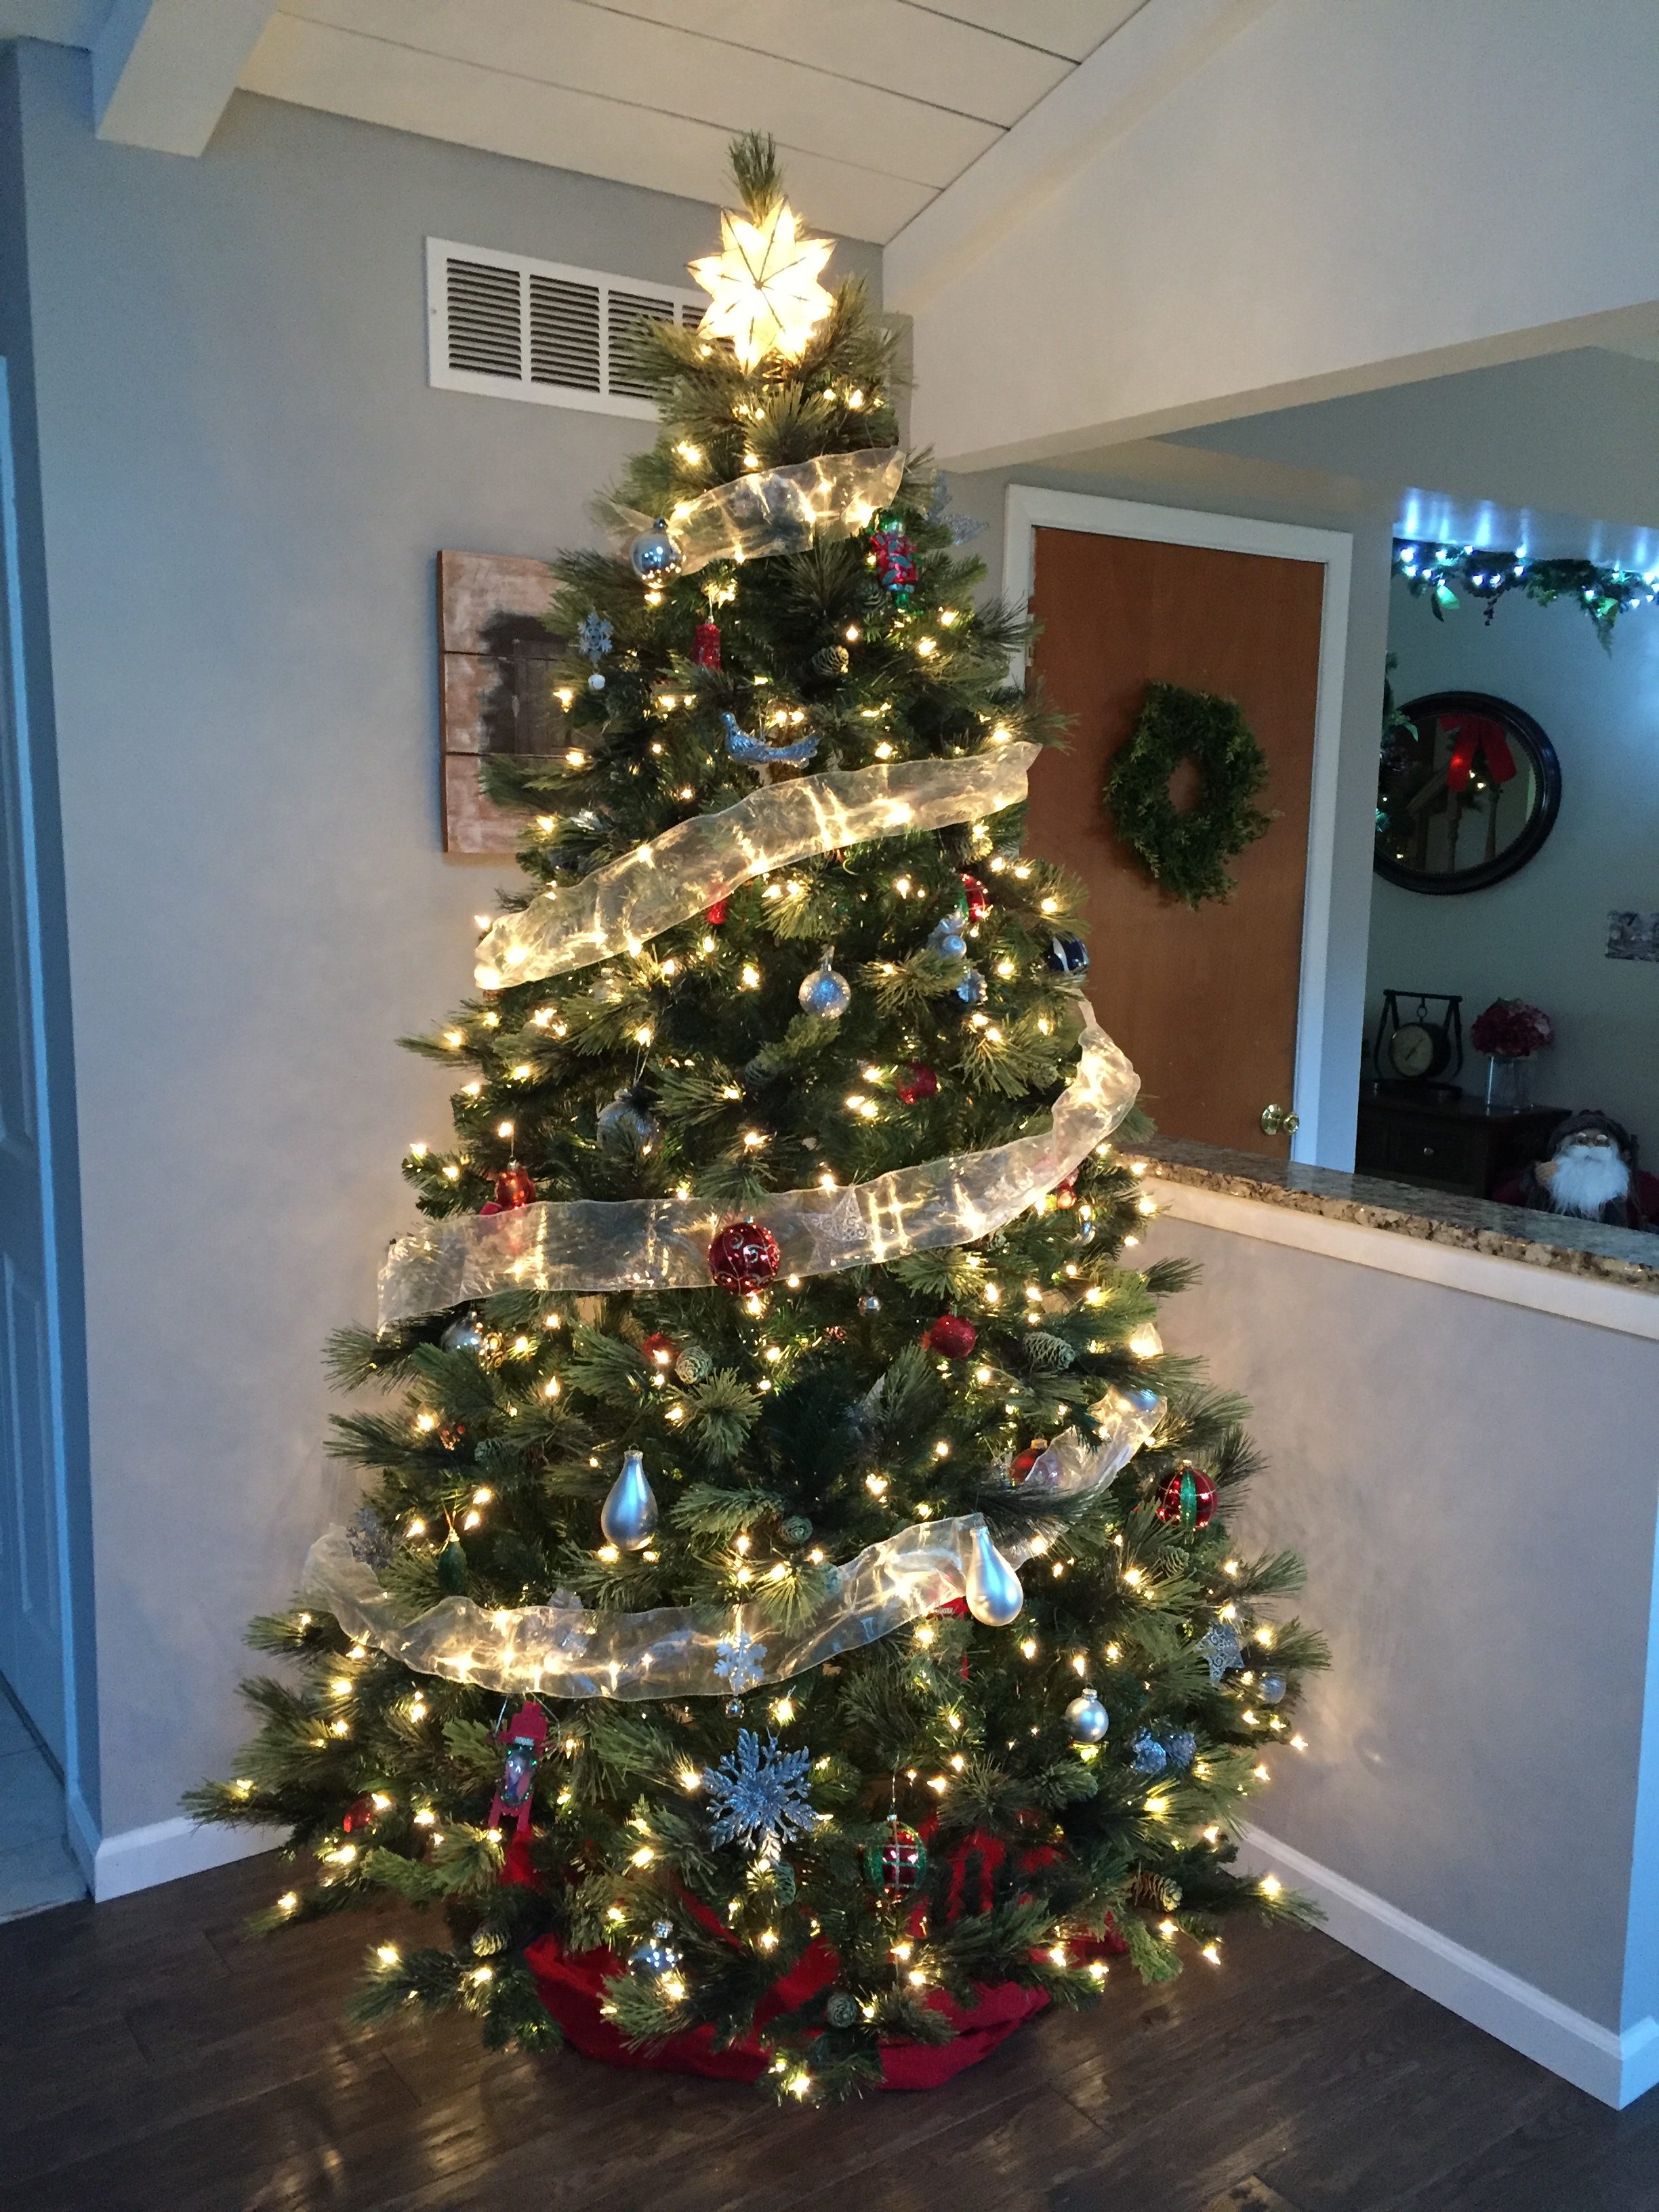 The Best Artificial Christmas Tree - The Kelly Homestead